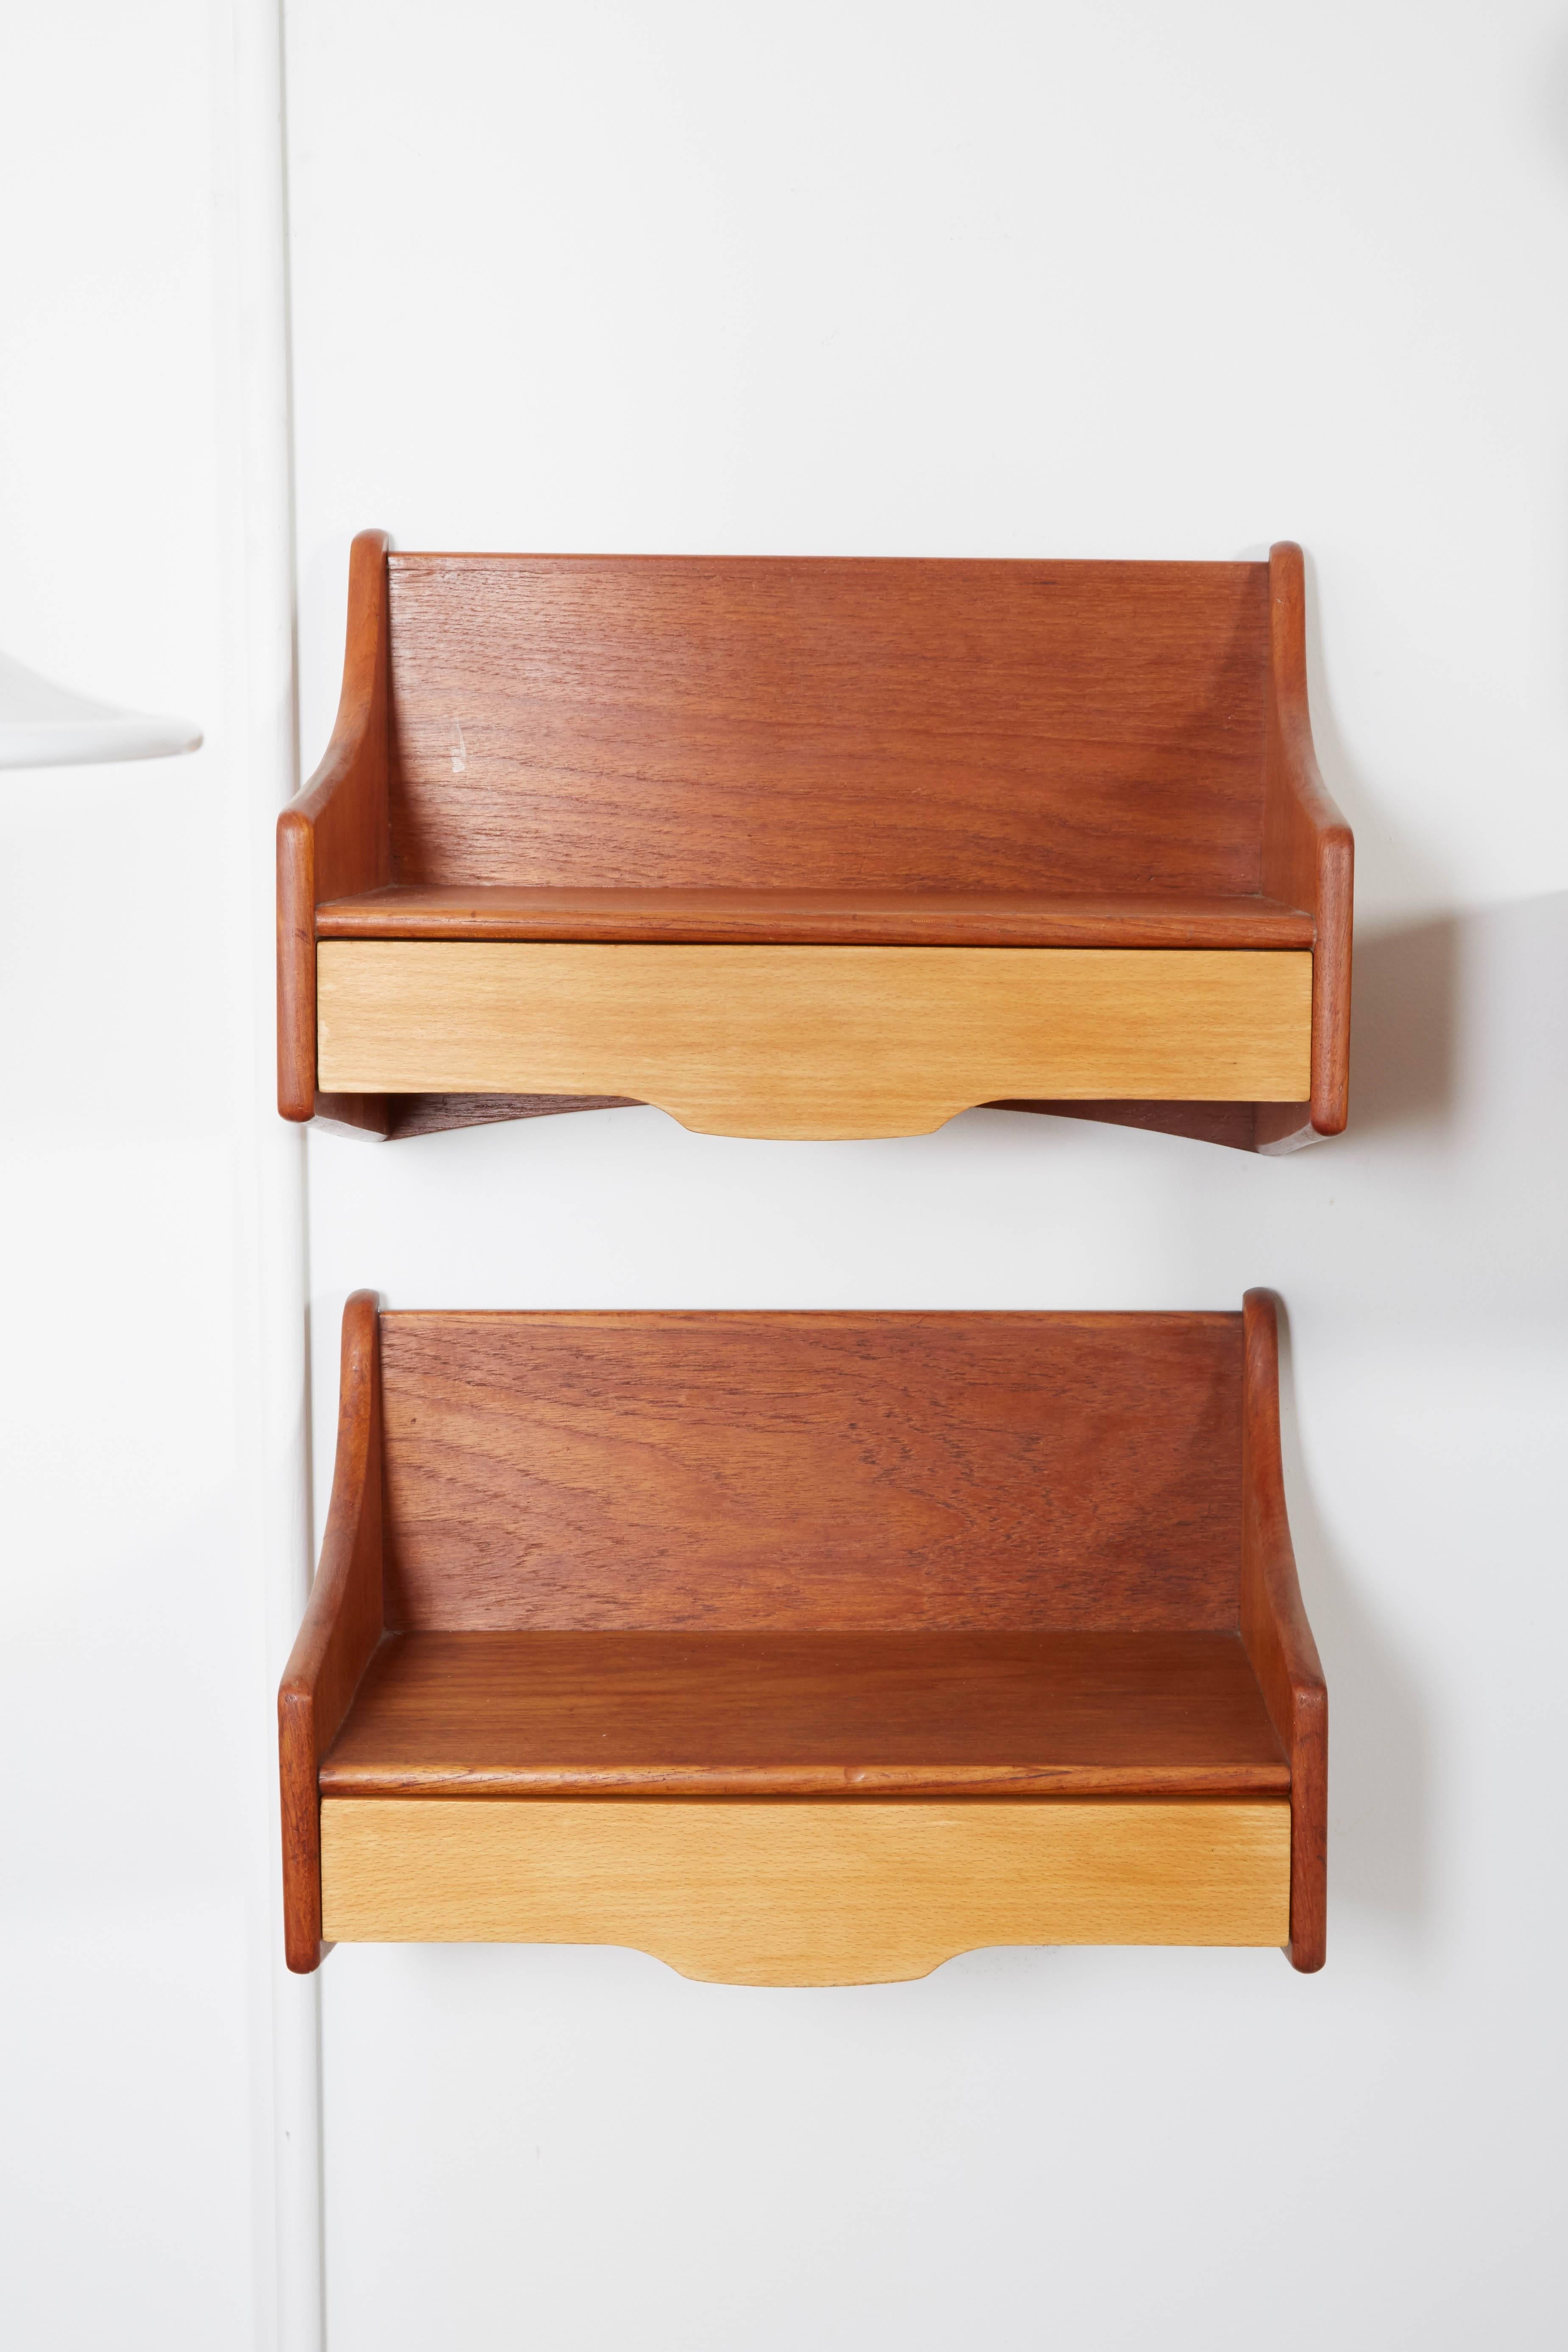 Vintage 1950s Wall Nightstands by Bender Madsen, Pair

These minimal wall shelves are in excellent condition. Intended to be wall mounted night stands, but obviously can be used in any part of the home anywhere you need a shelf. The drawer makes it